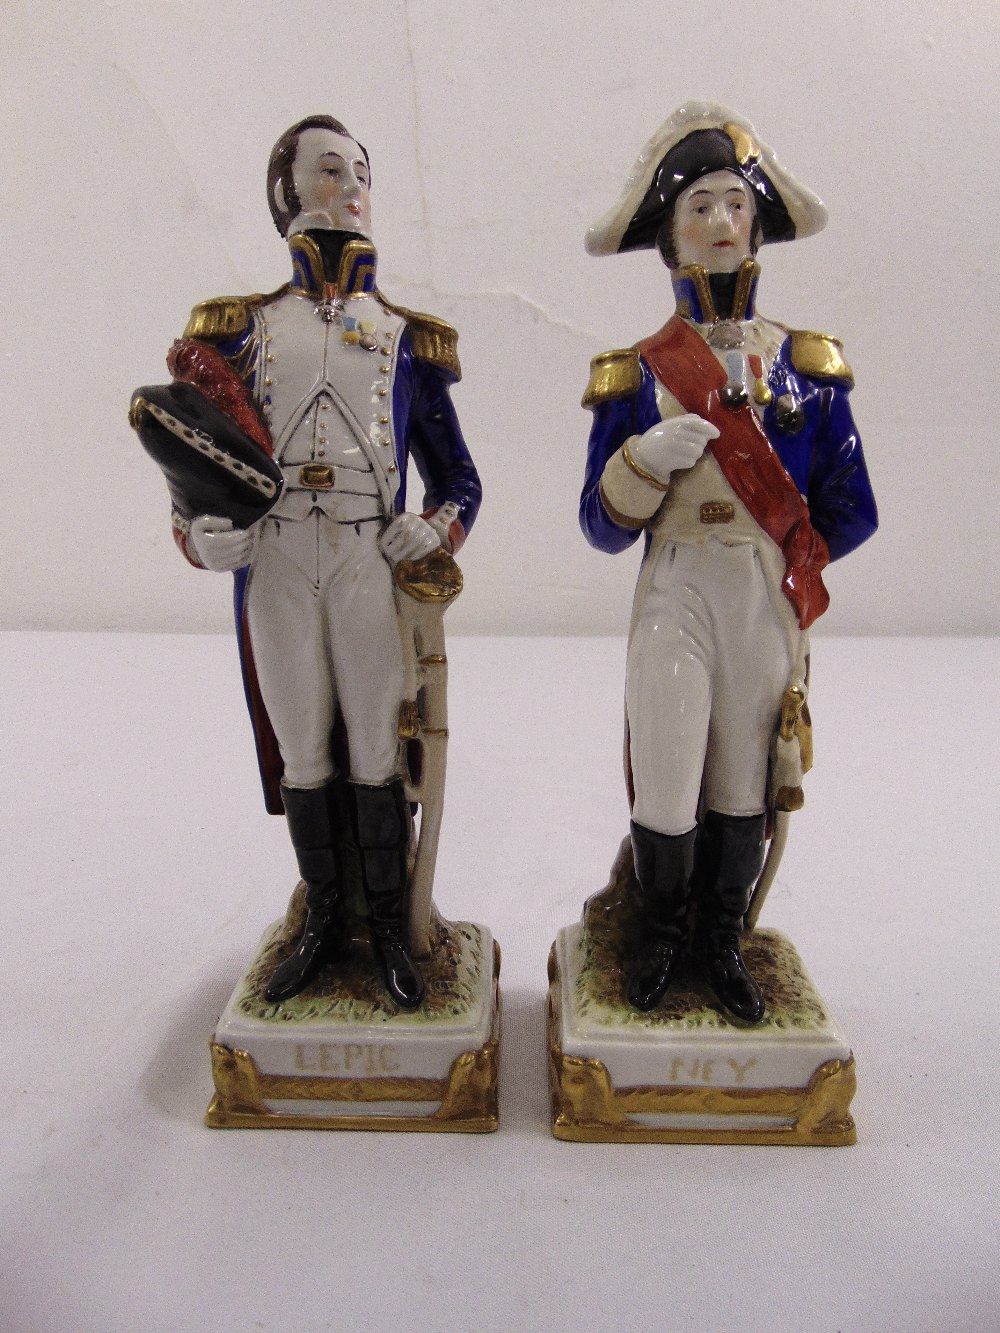 Two porcelain figurines of French military generals Nay and Lepi